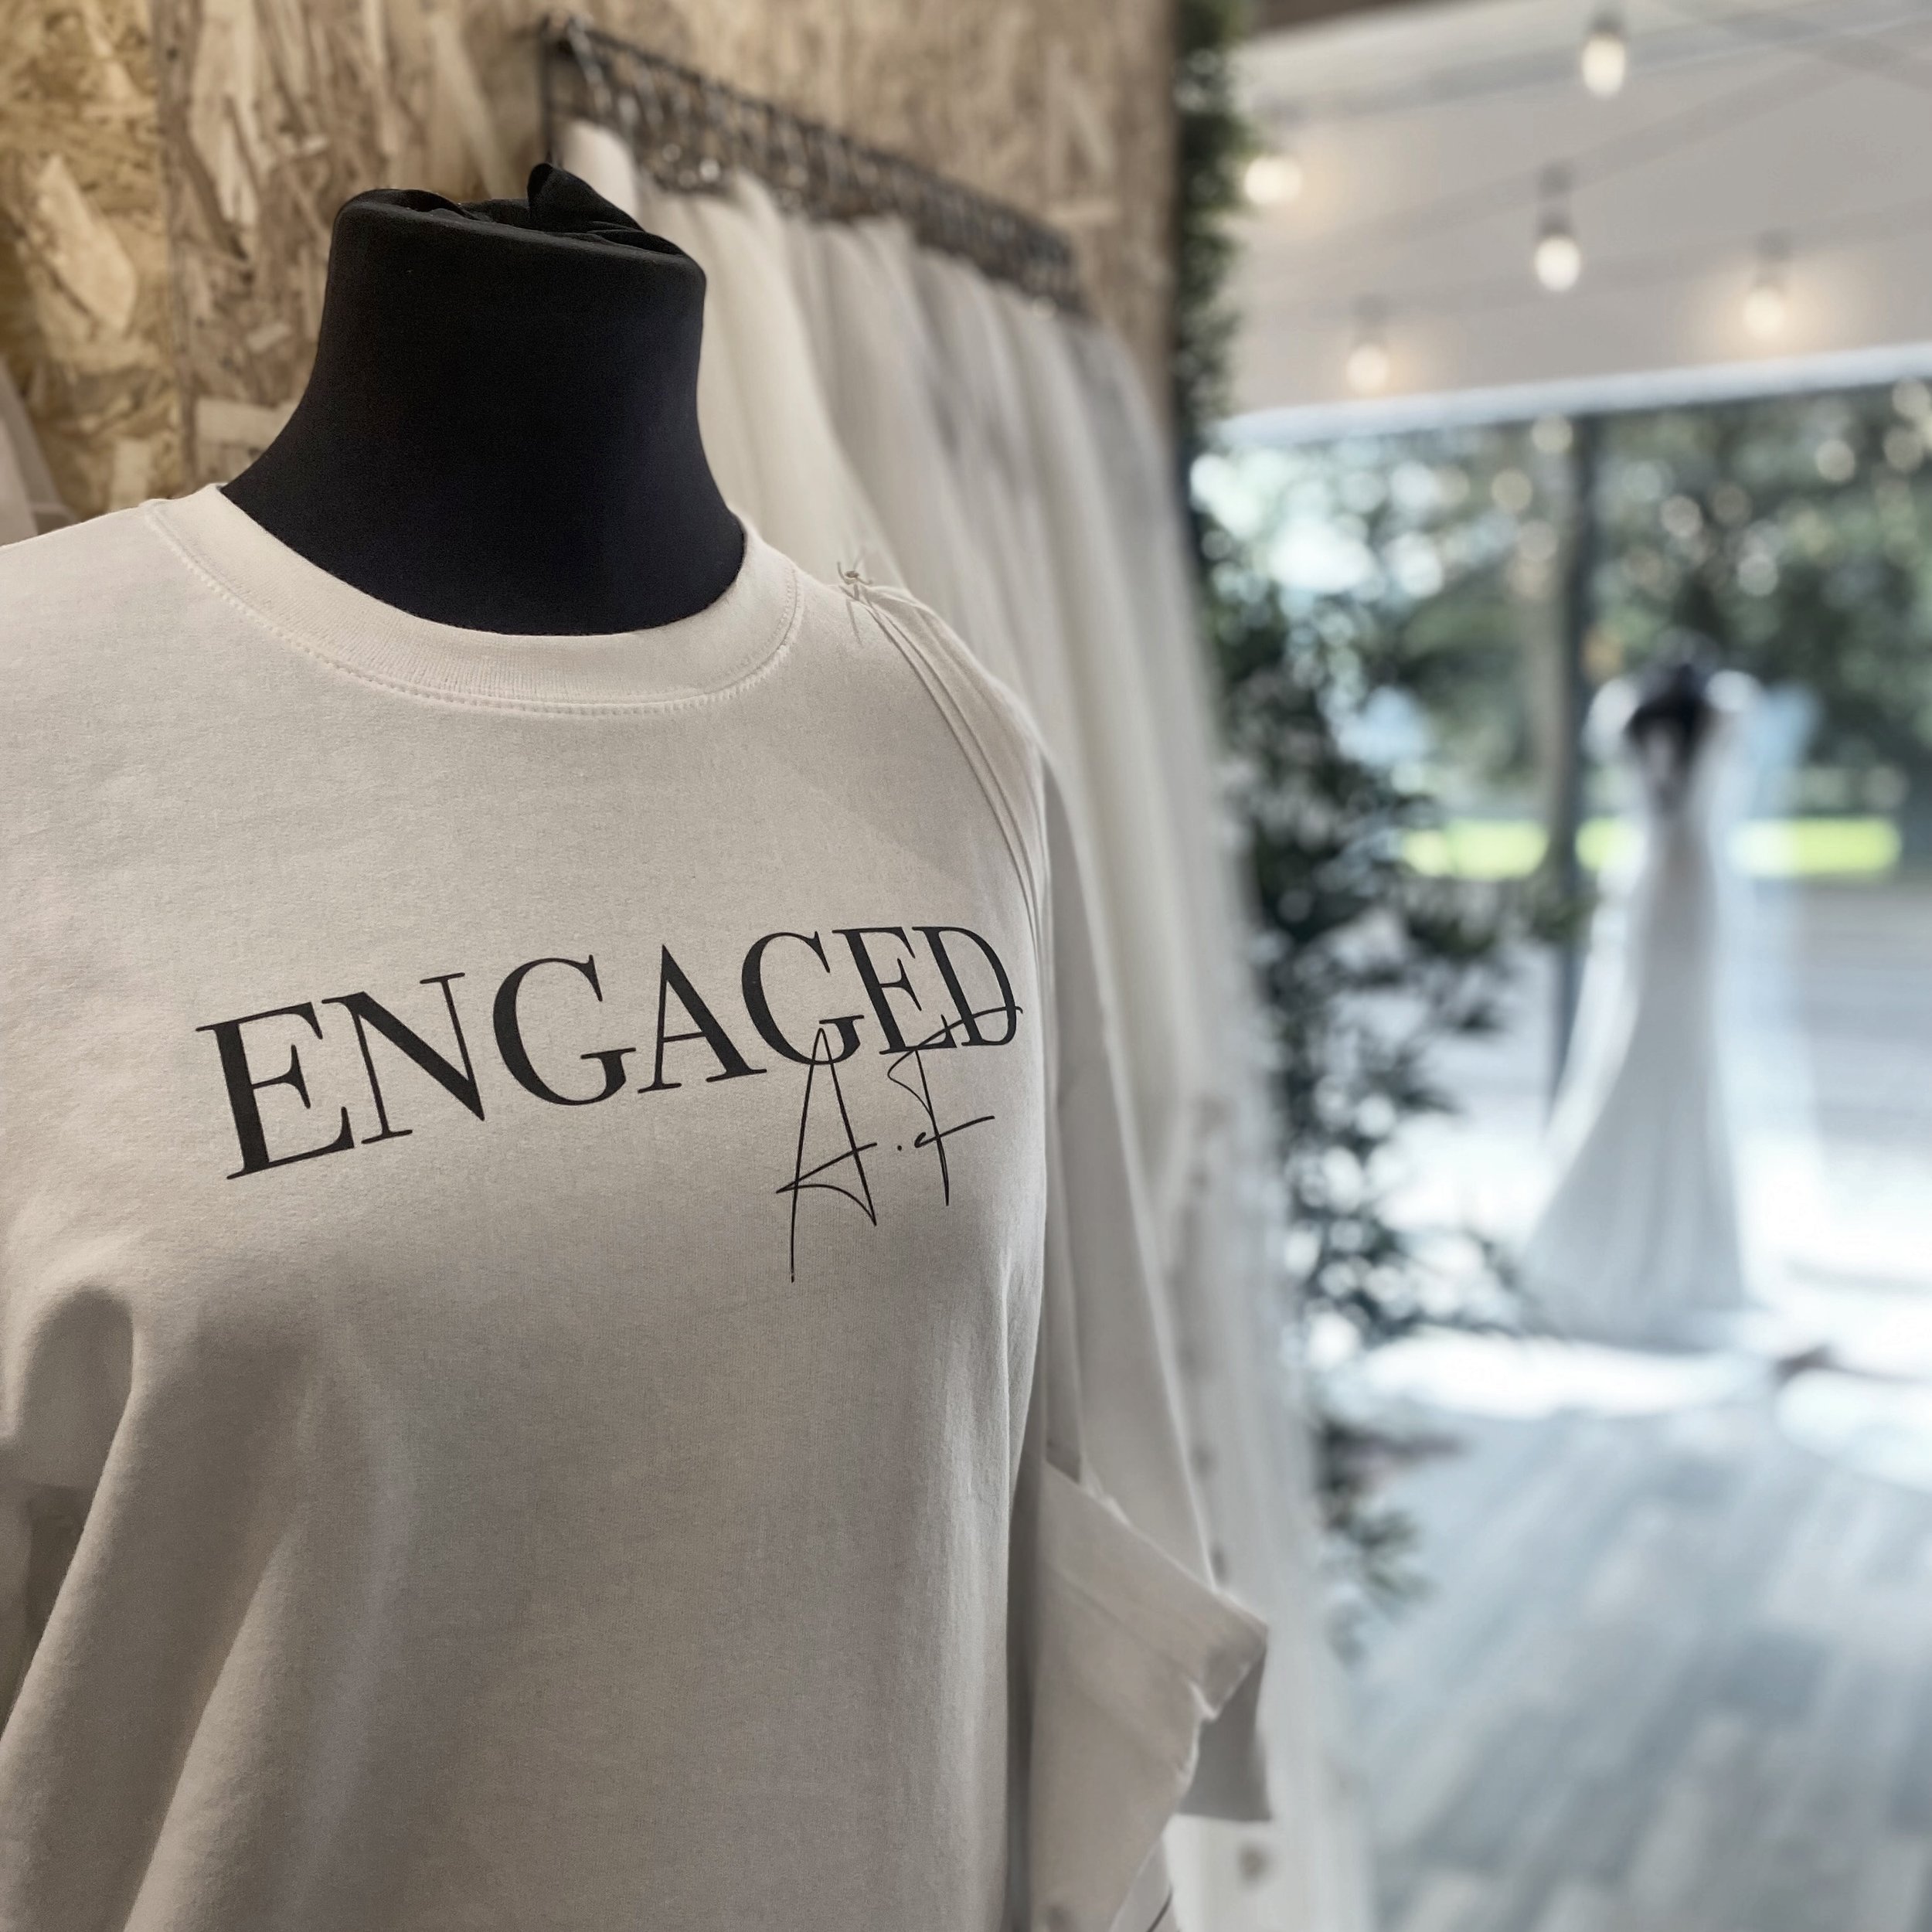 Engaged?!😍 It&rsquo;s WEDDING SEASON! Our queue jump bookings are flooding in and we can&rsquo;t wait to dress you Brides🤍

Don&rsquo;t forget if you&rsquo;re planning on visiting us, guarantee your appointment with a QUEUE JUMP!✨

See you real soo